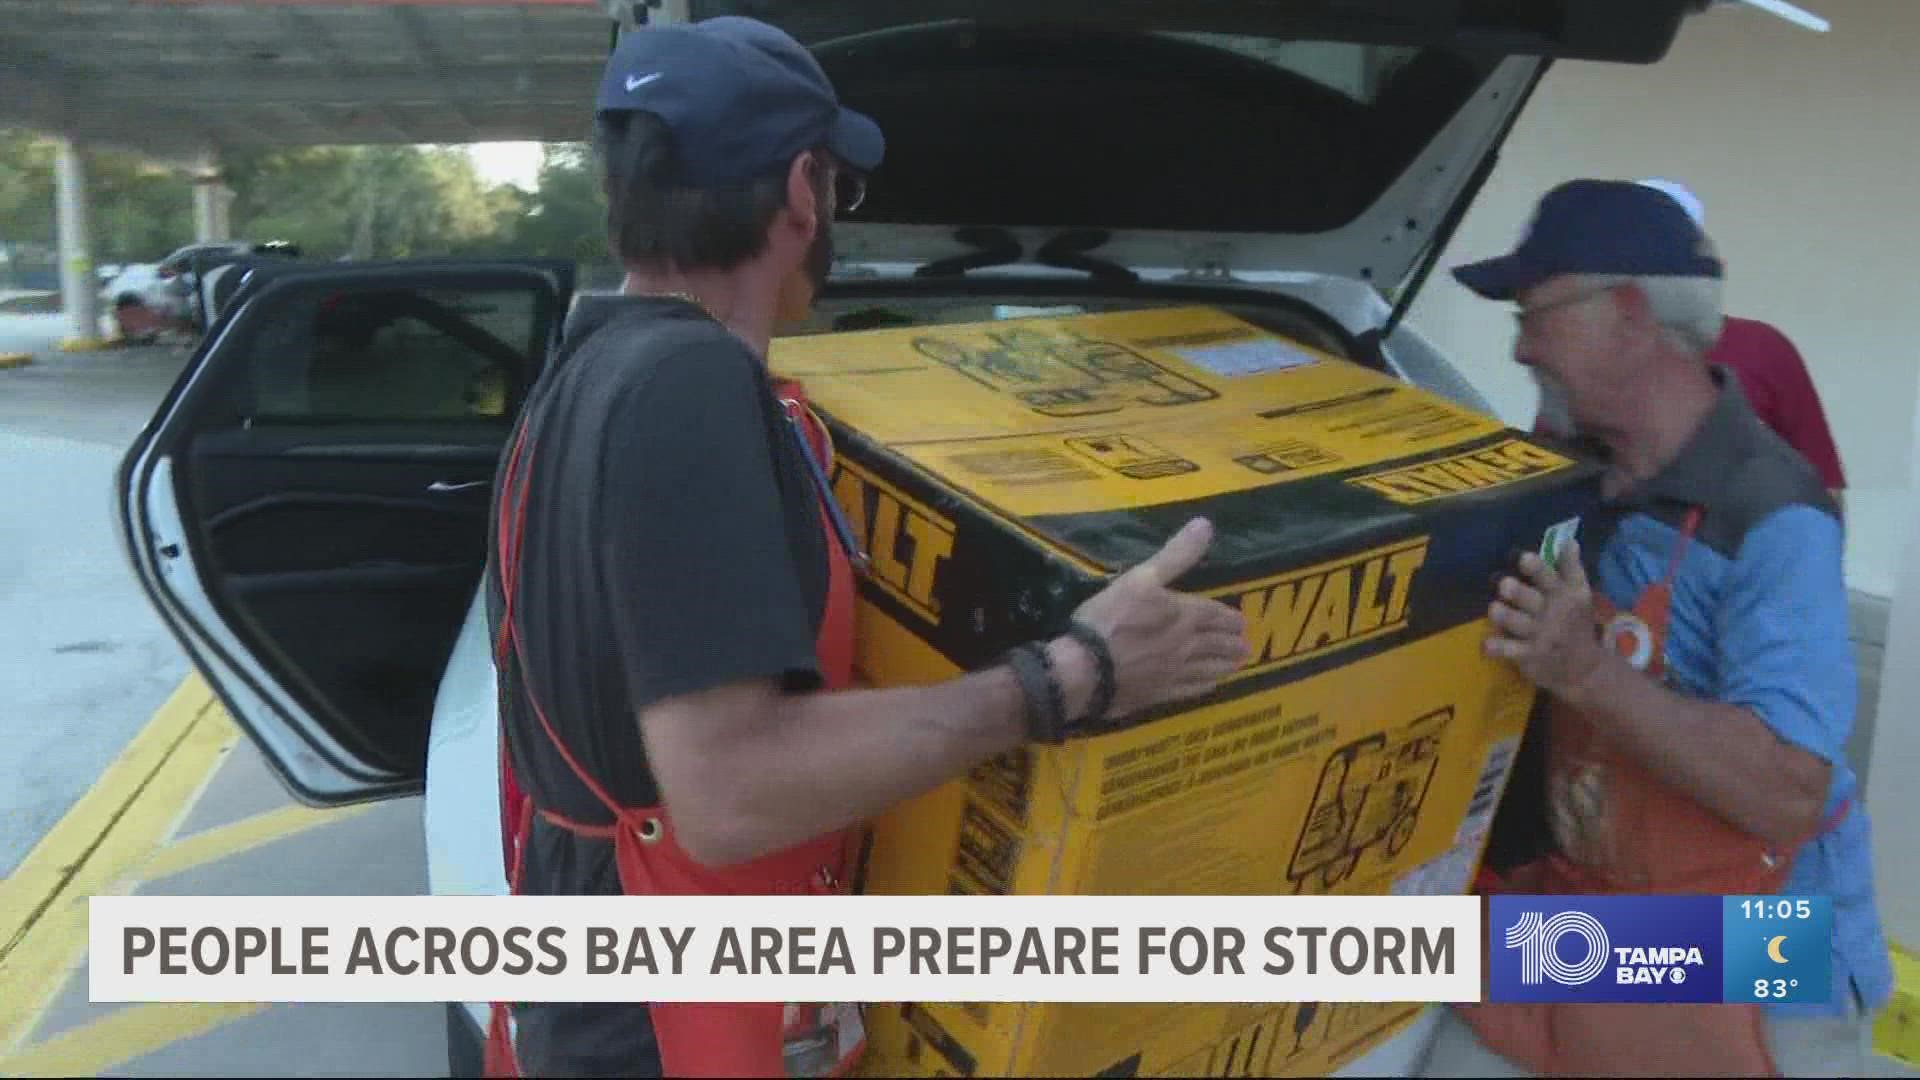 From a first aid kit, batteries, bottled water and more, people across the Tampa Bay-area are preparing for Tropical Storm Ian.